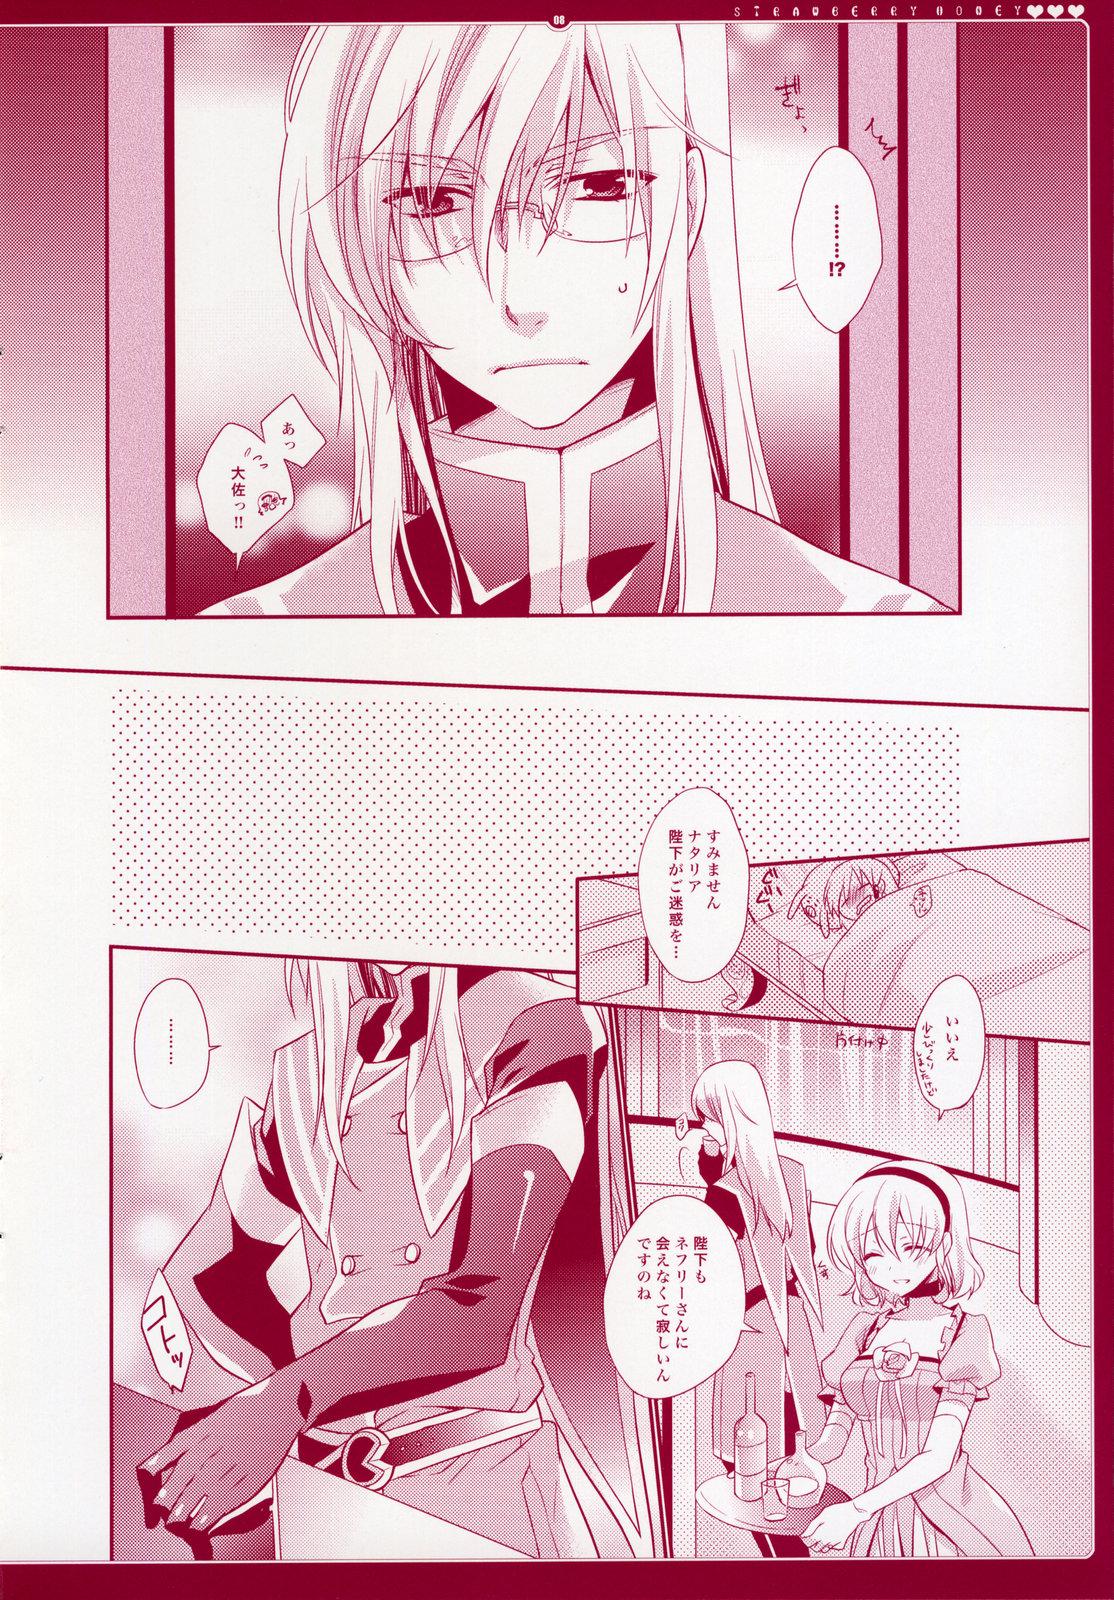 Stretching Strawberry Honey - Tales of the abyss Exhib - Page 9